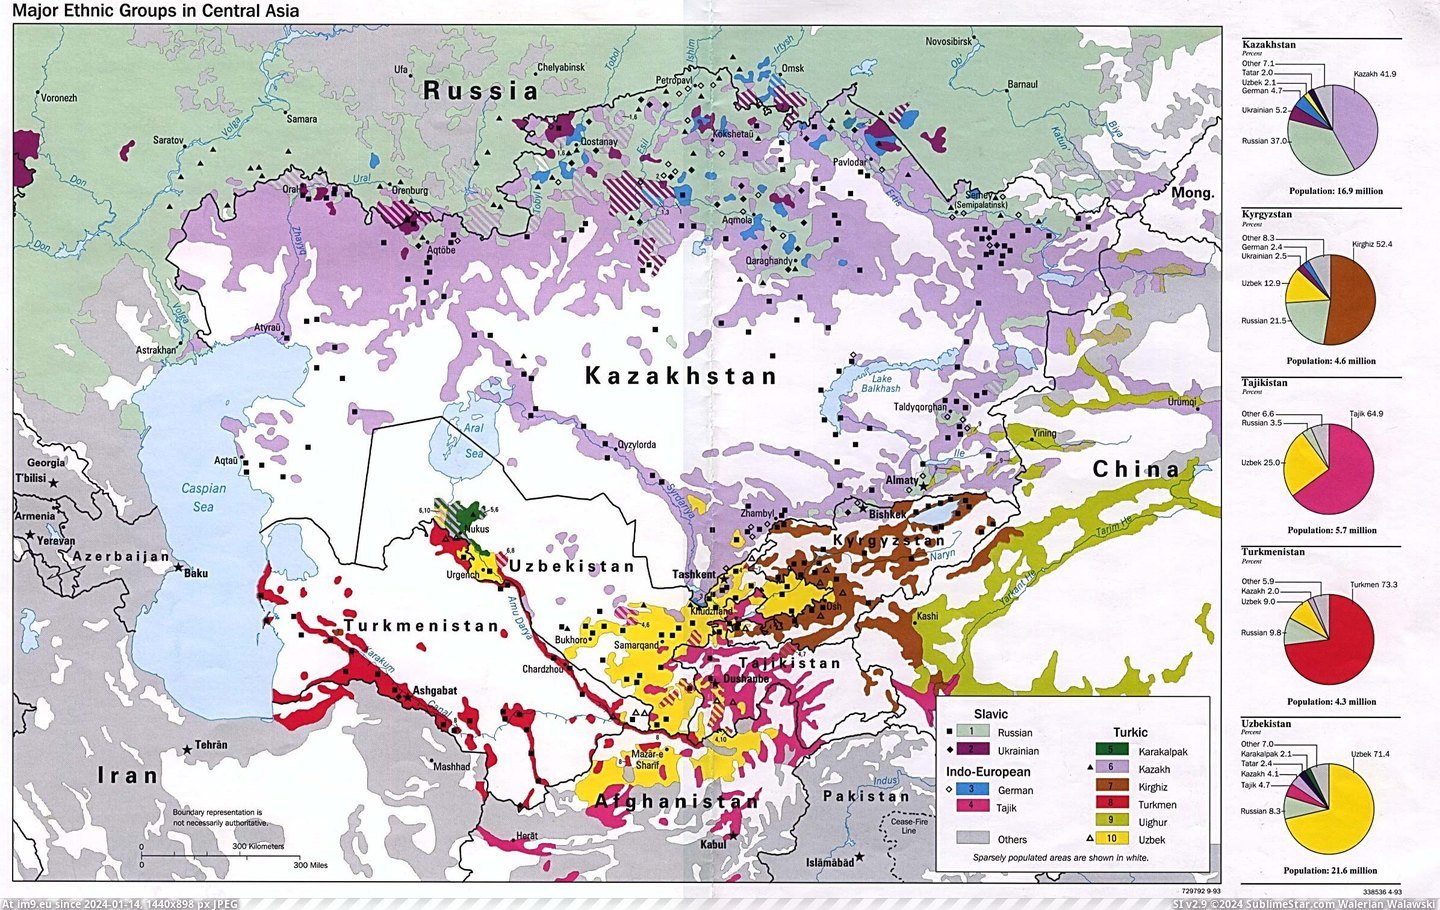 #Major #Asia #Groups #Central #Ethnic [Mapporn] Major Ethnic Groups in Central Asia [2392x1504] Pic. (Image of album My r/MAPS favs))